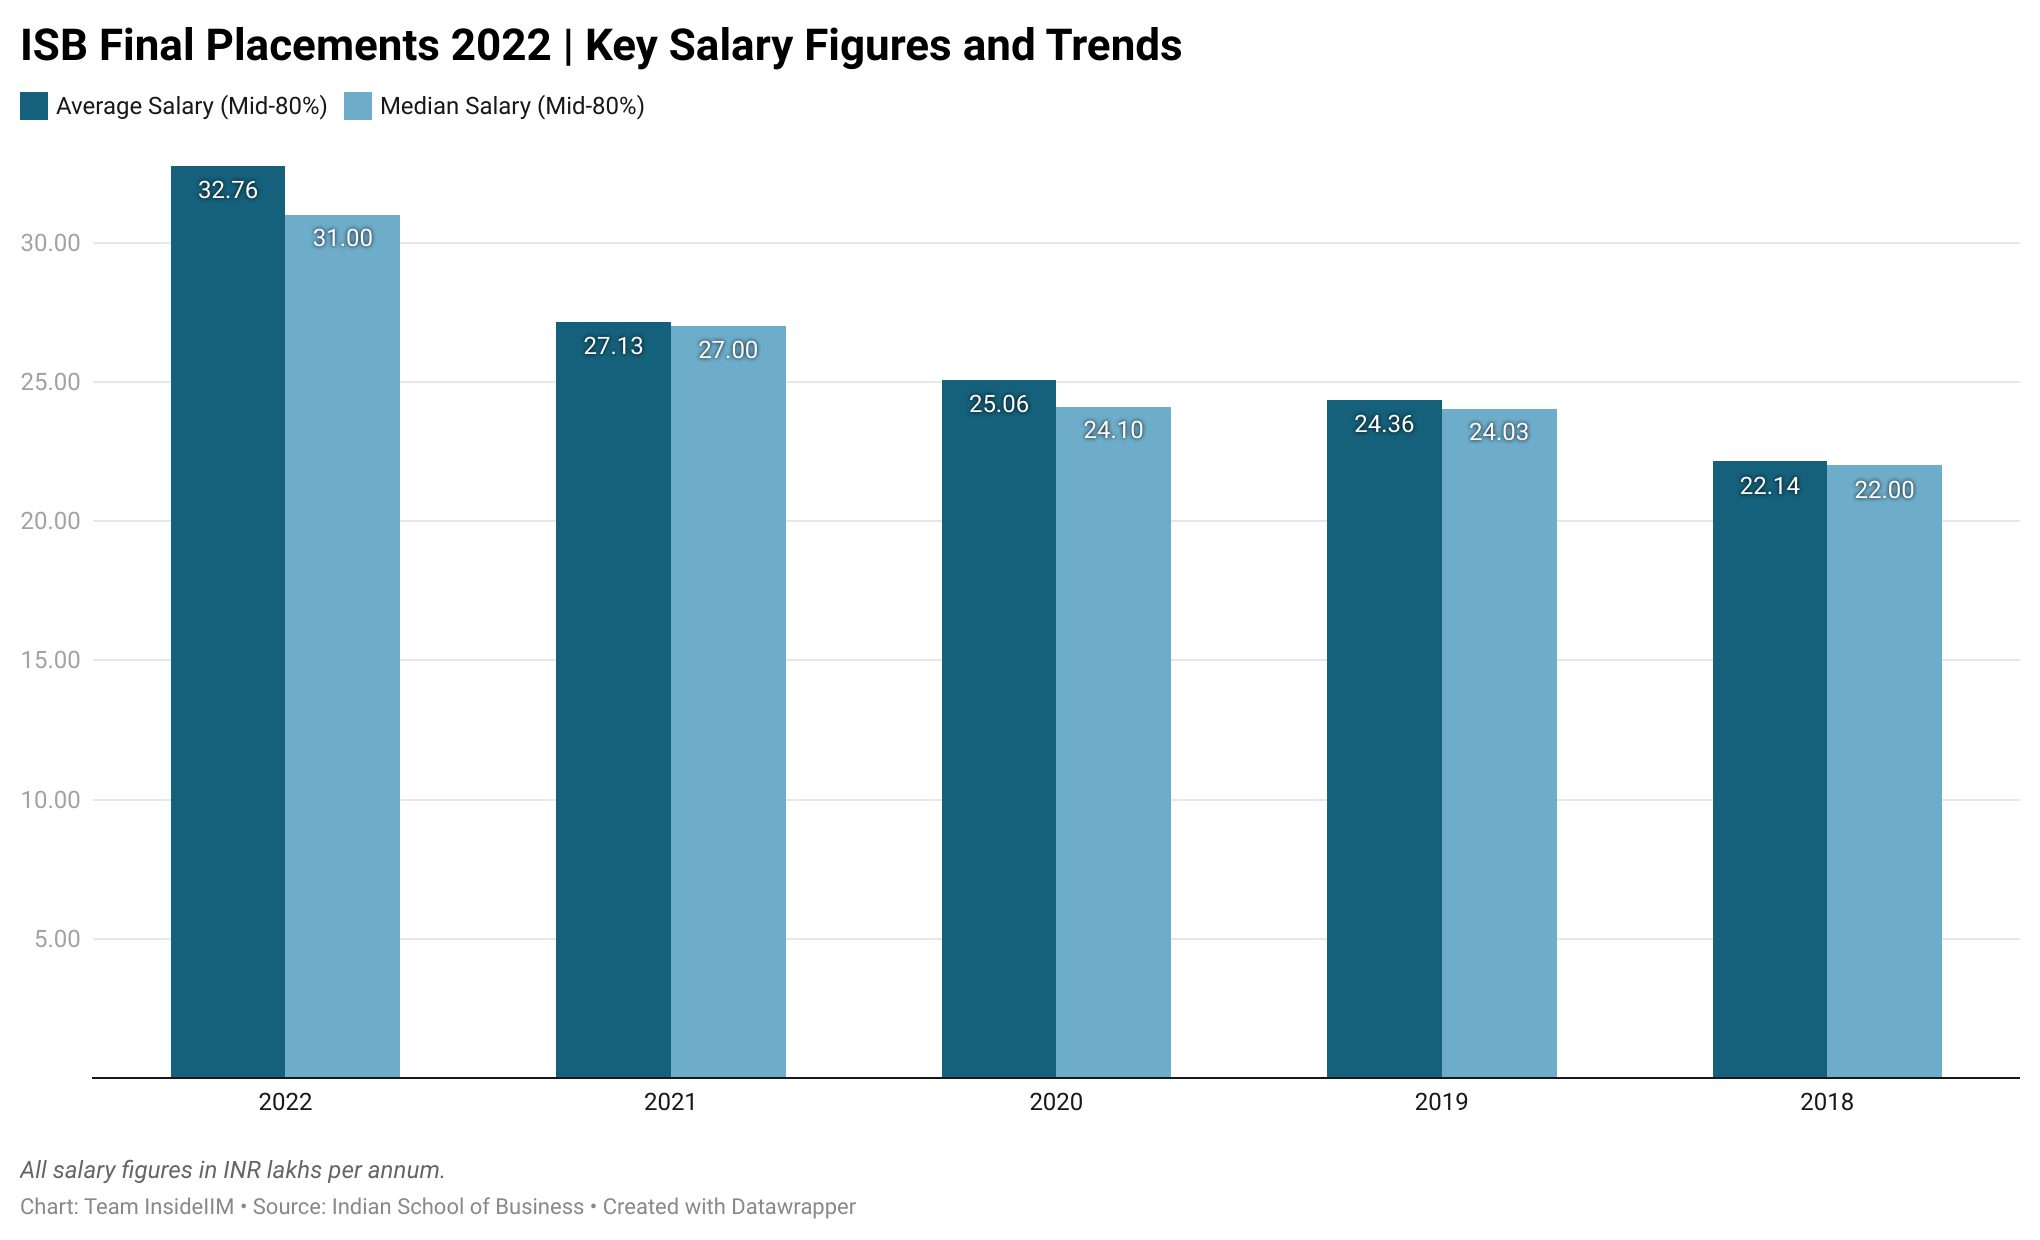 ISB Placements 2022 - Key Salary Figures and Trends